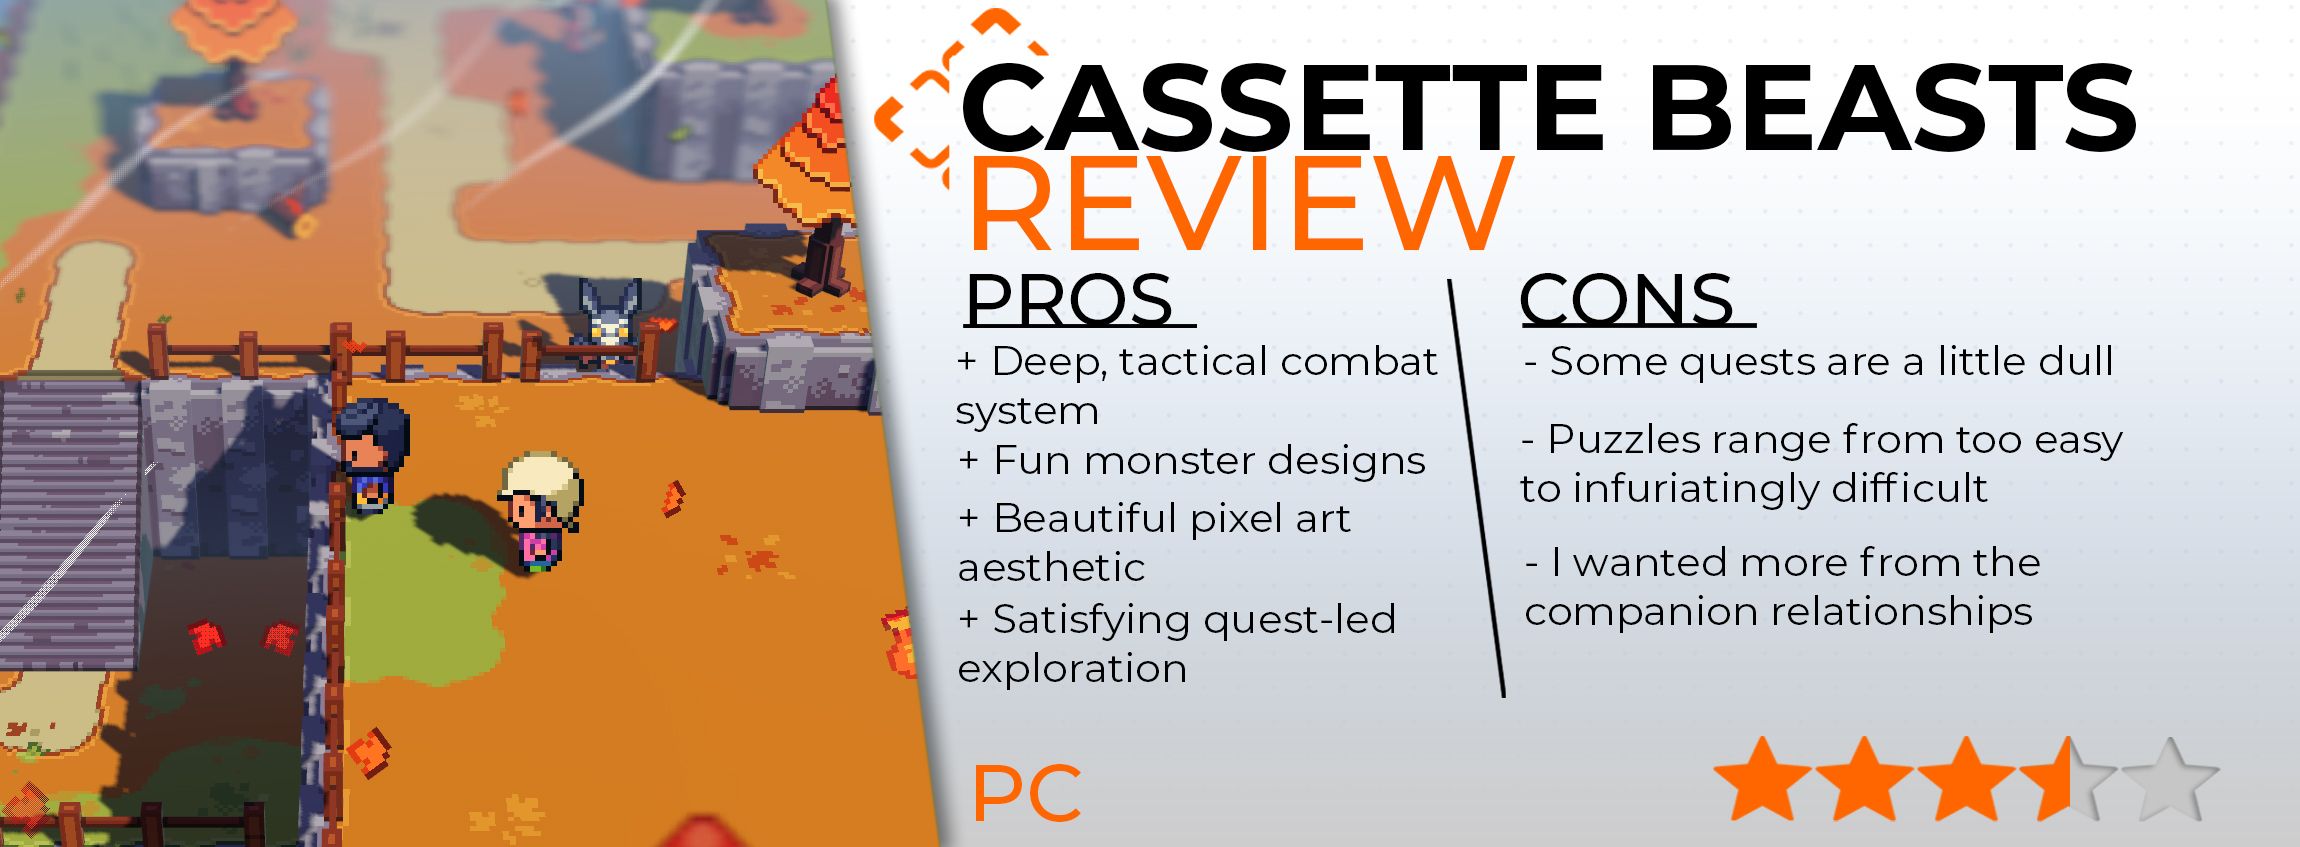 Cassette Beasts review card